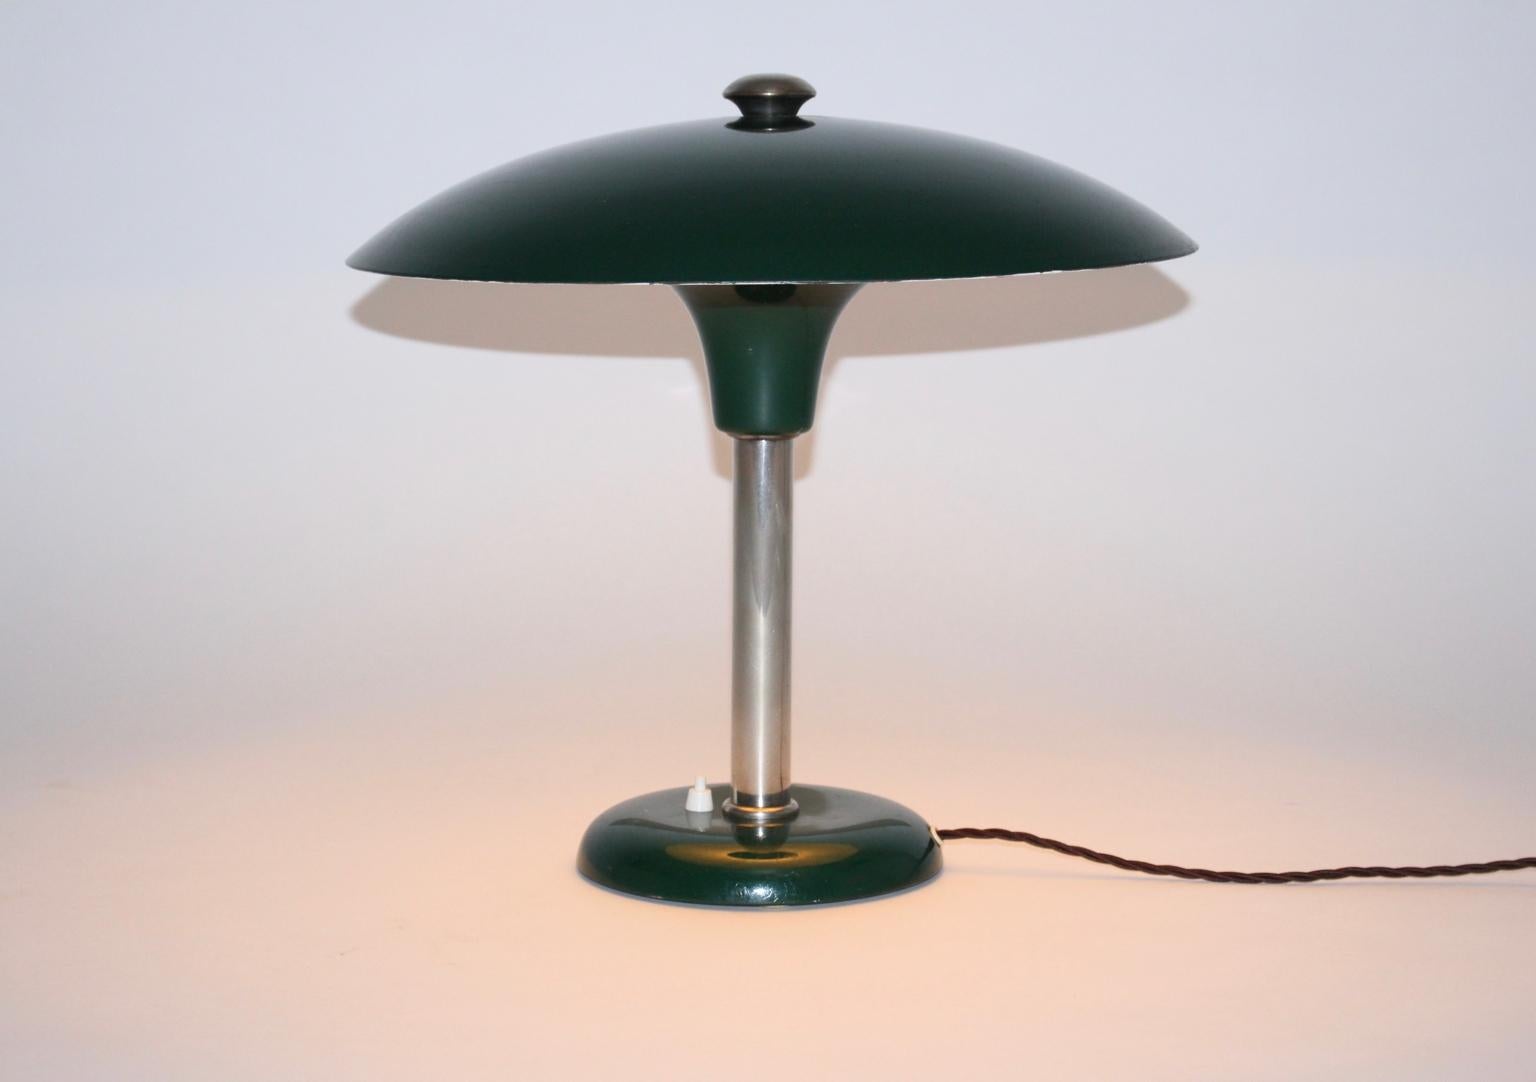 Green Bauhaus Art Deco Vintage Table Lamp Metal by Max Schumacher, 1934, Germany For Sale 2